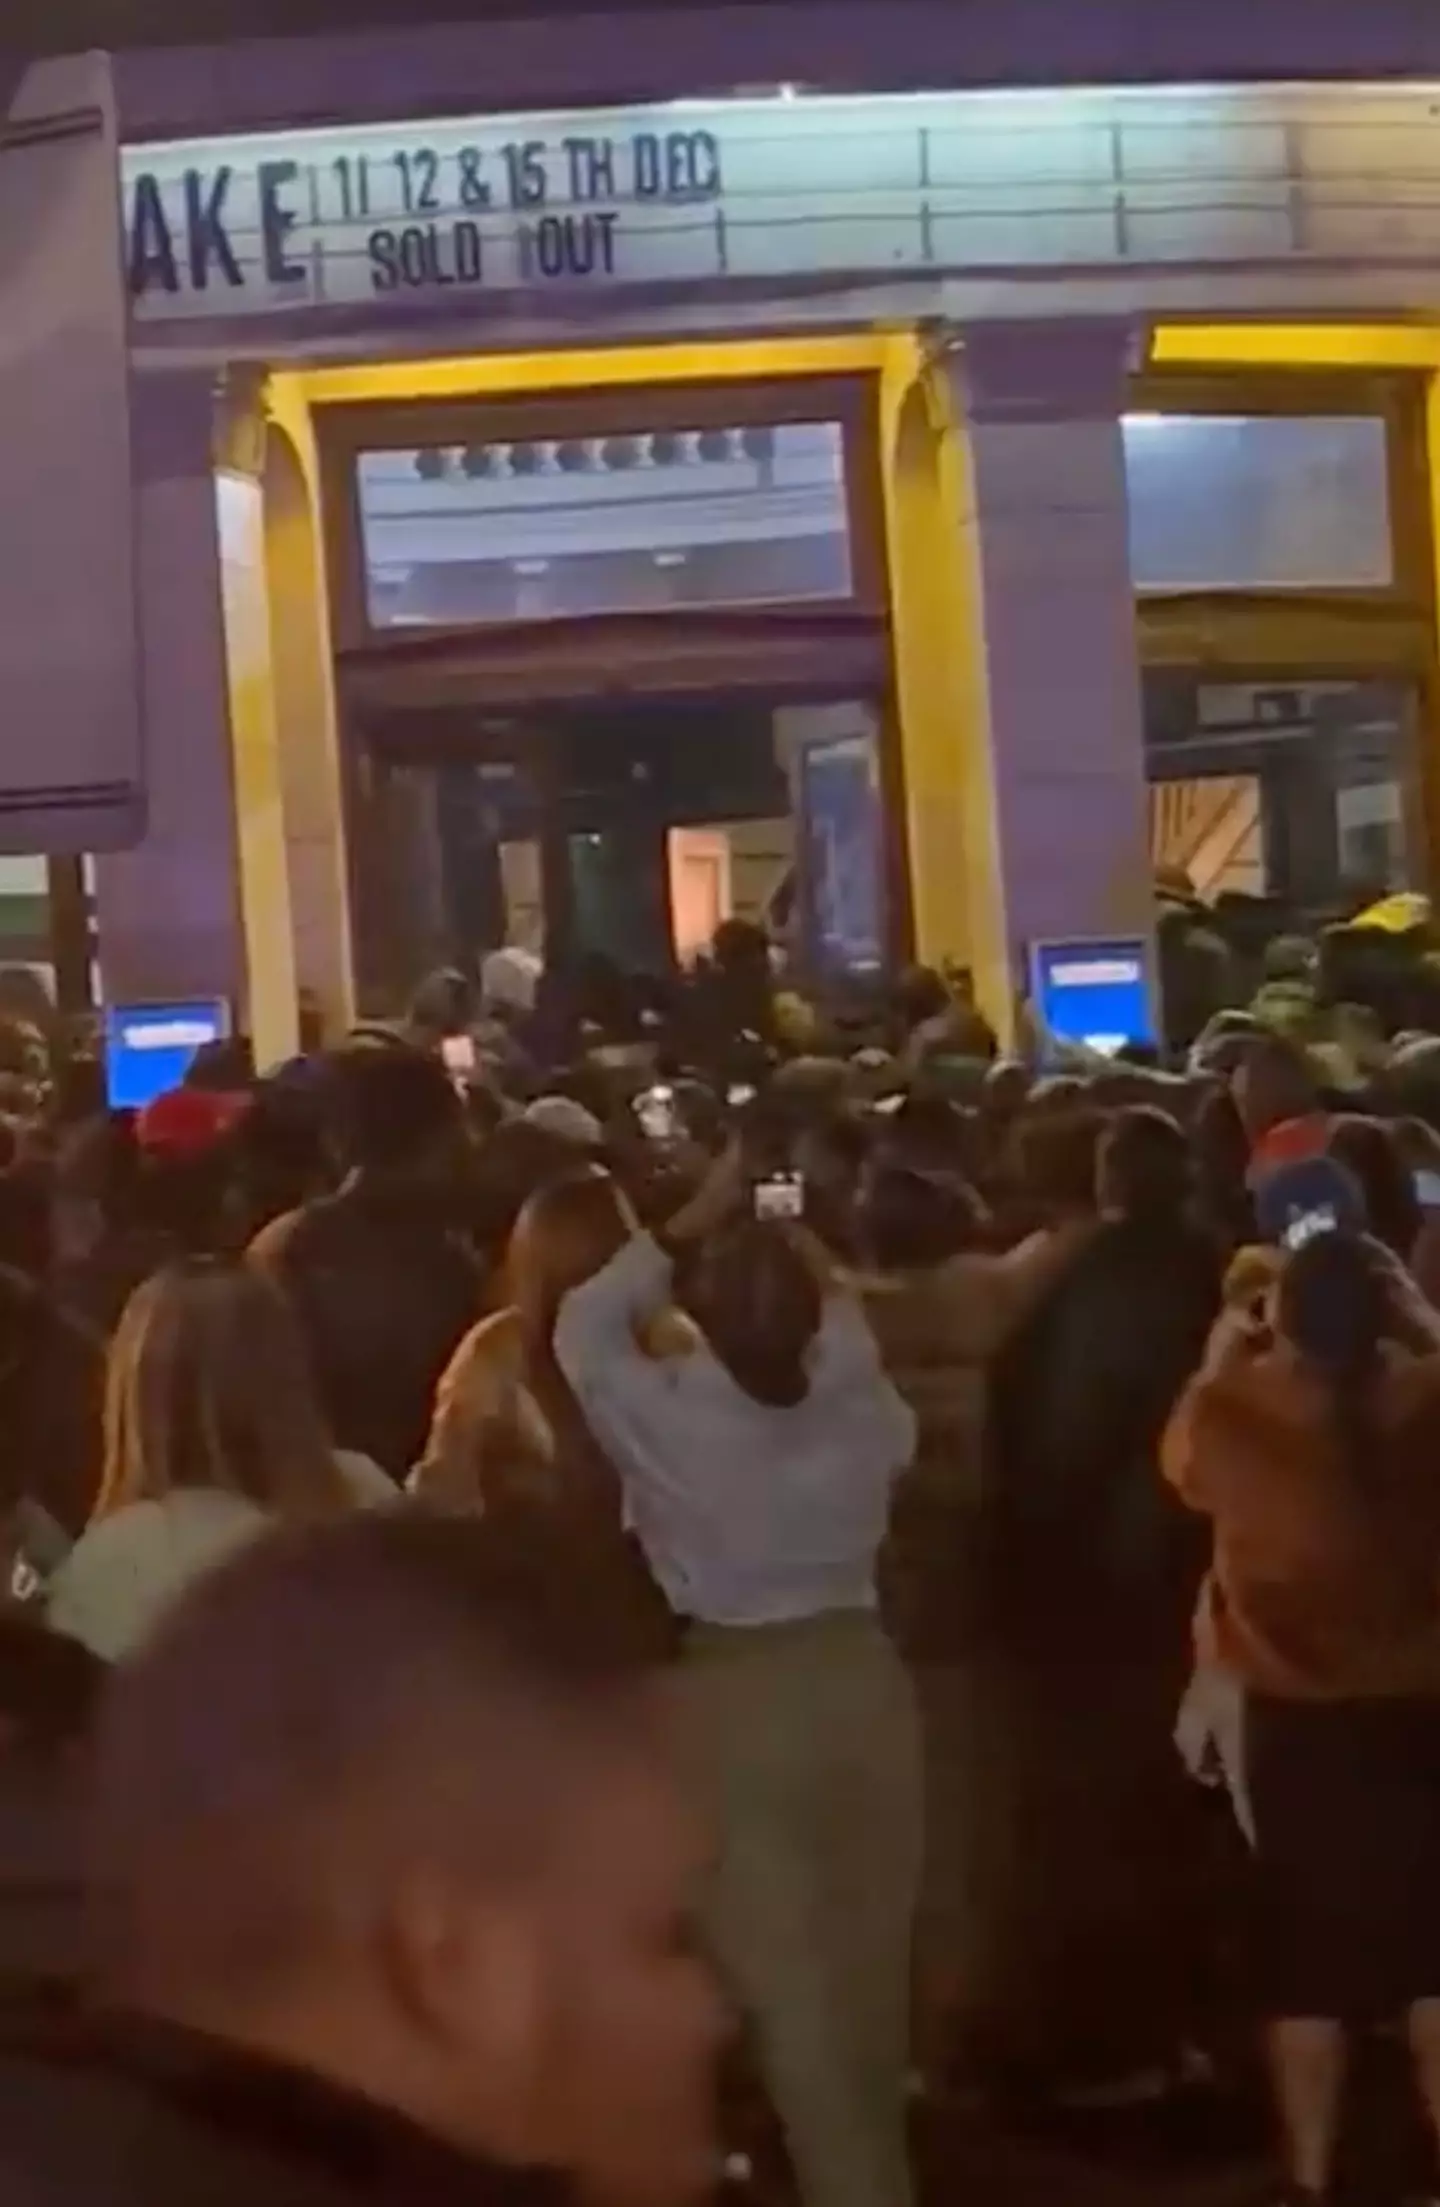 Crowds were filmed rushing through the doors.